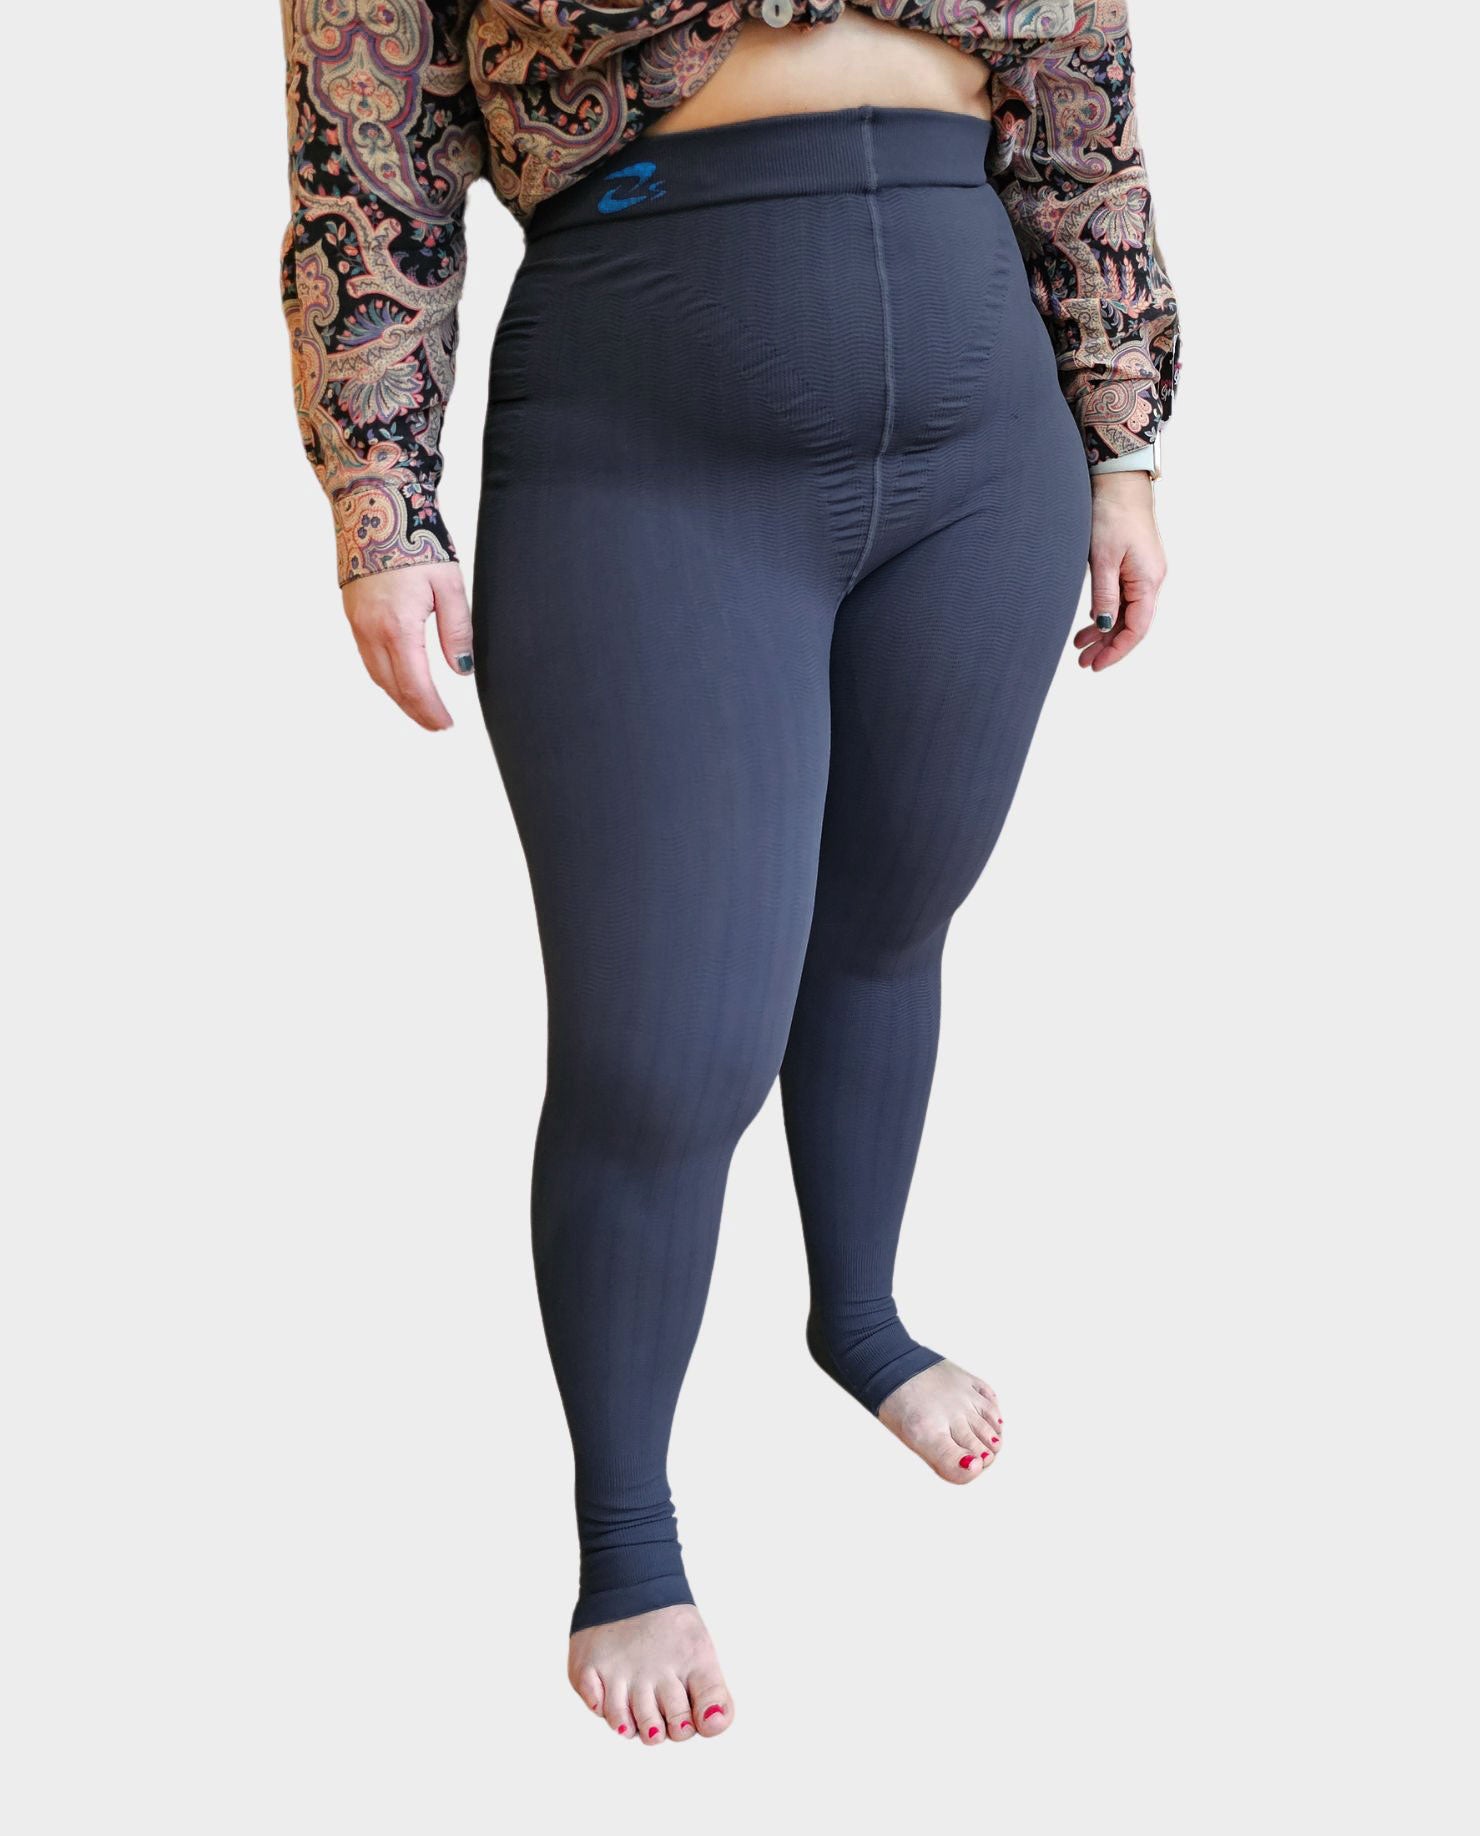 Feste Bankl - The Better than nothing compression leggings